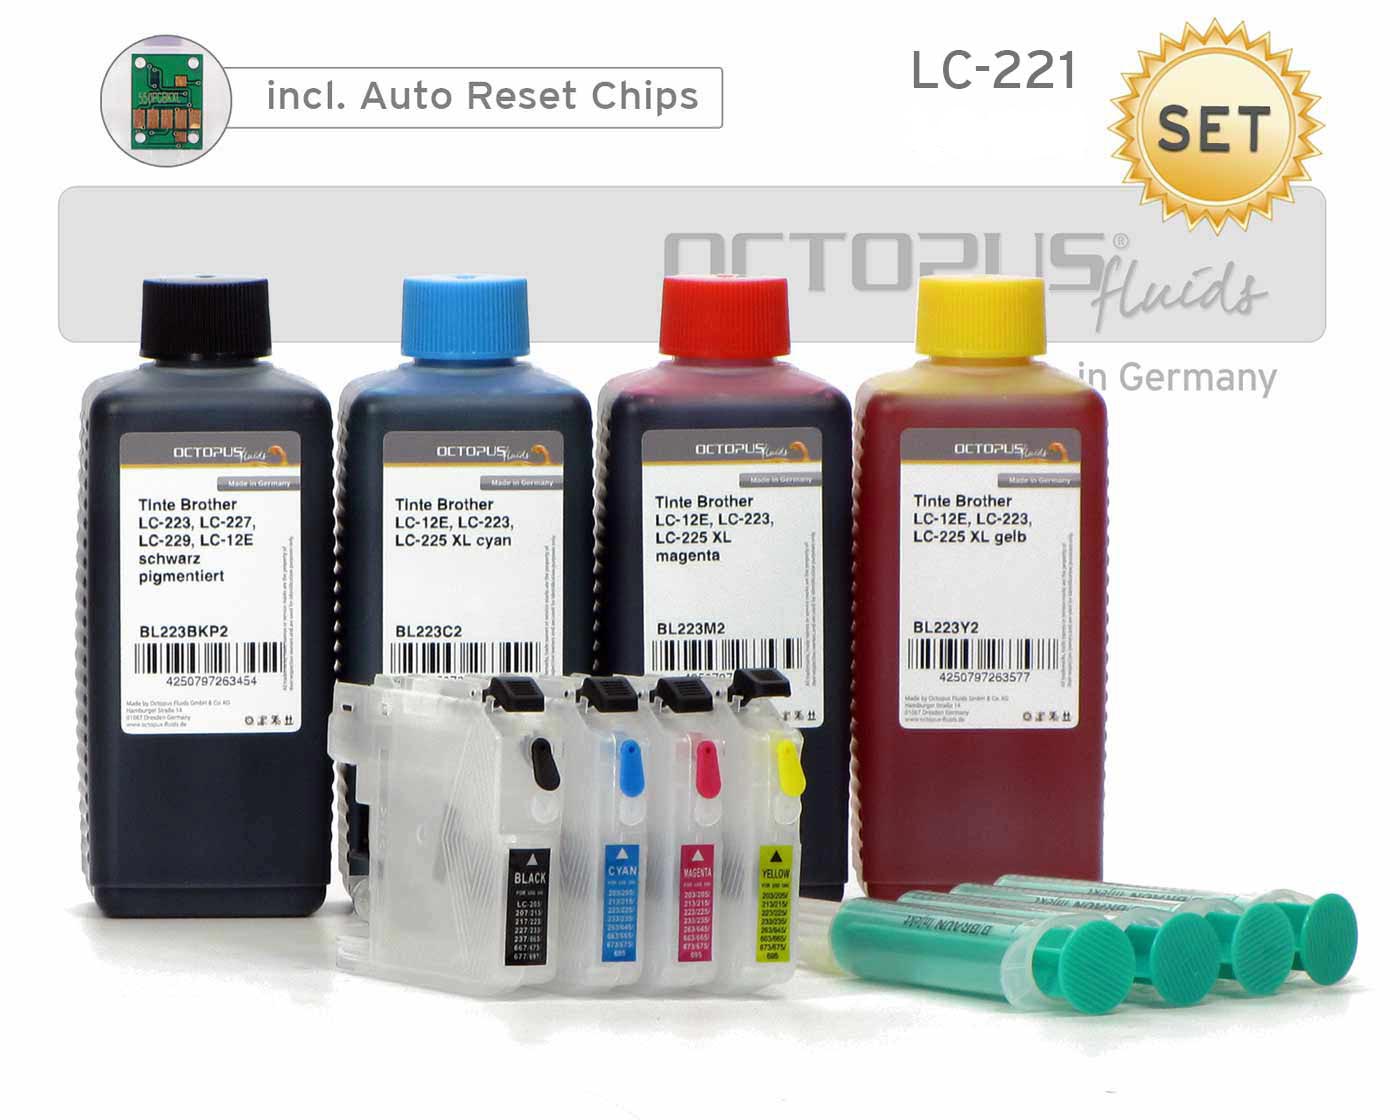 Set of refillable cartridges compatible with Brother LC-221 with chips and ink